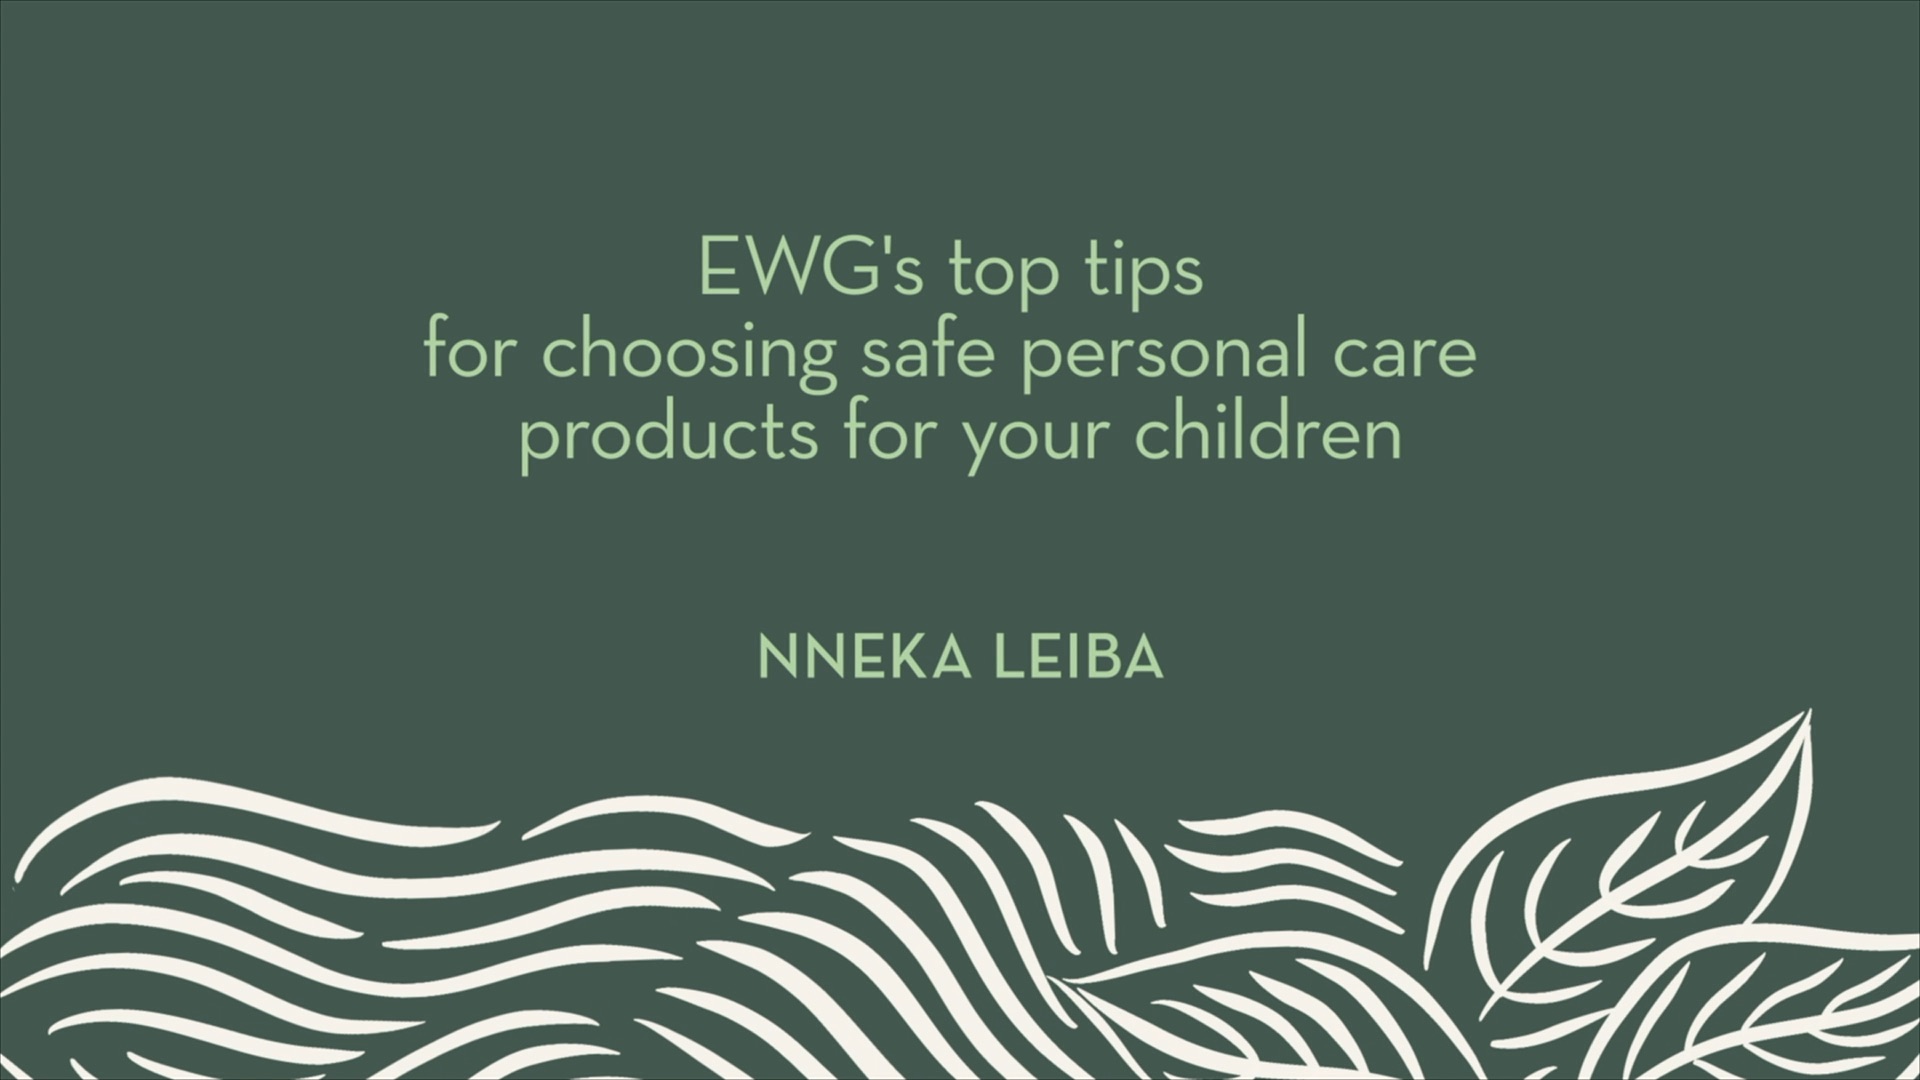 Nneka Leiba | EWG's top tips for choosing safe personal care products